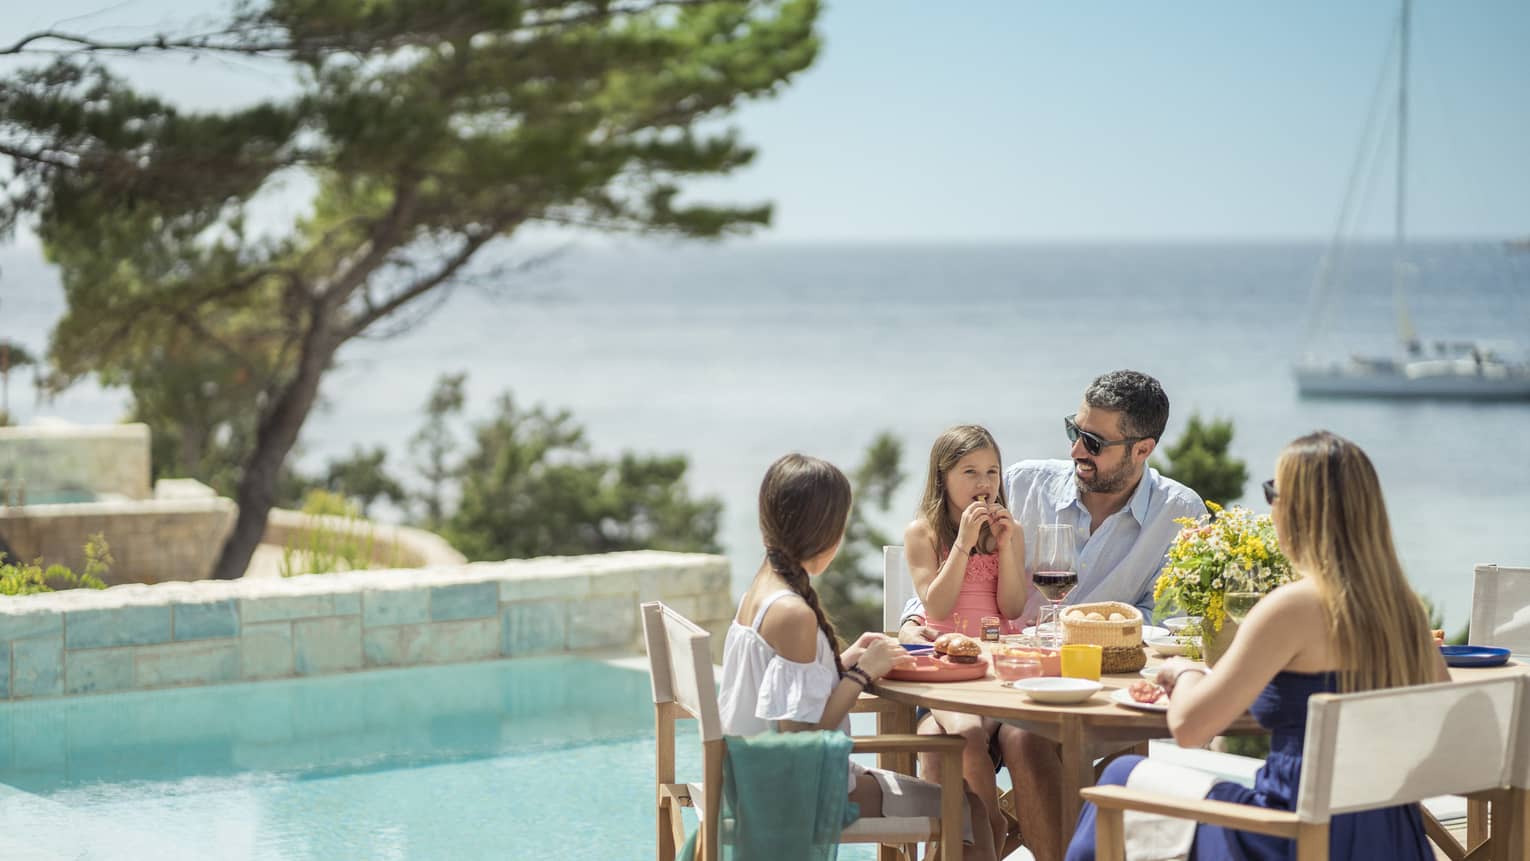 Family of five enjoys a meal outside next to the plunge pool, a sailboat on the Mediterranean in the background